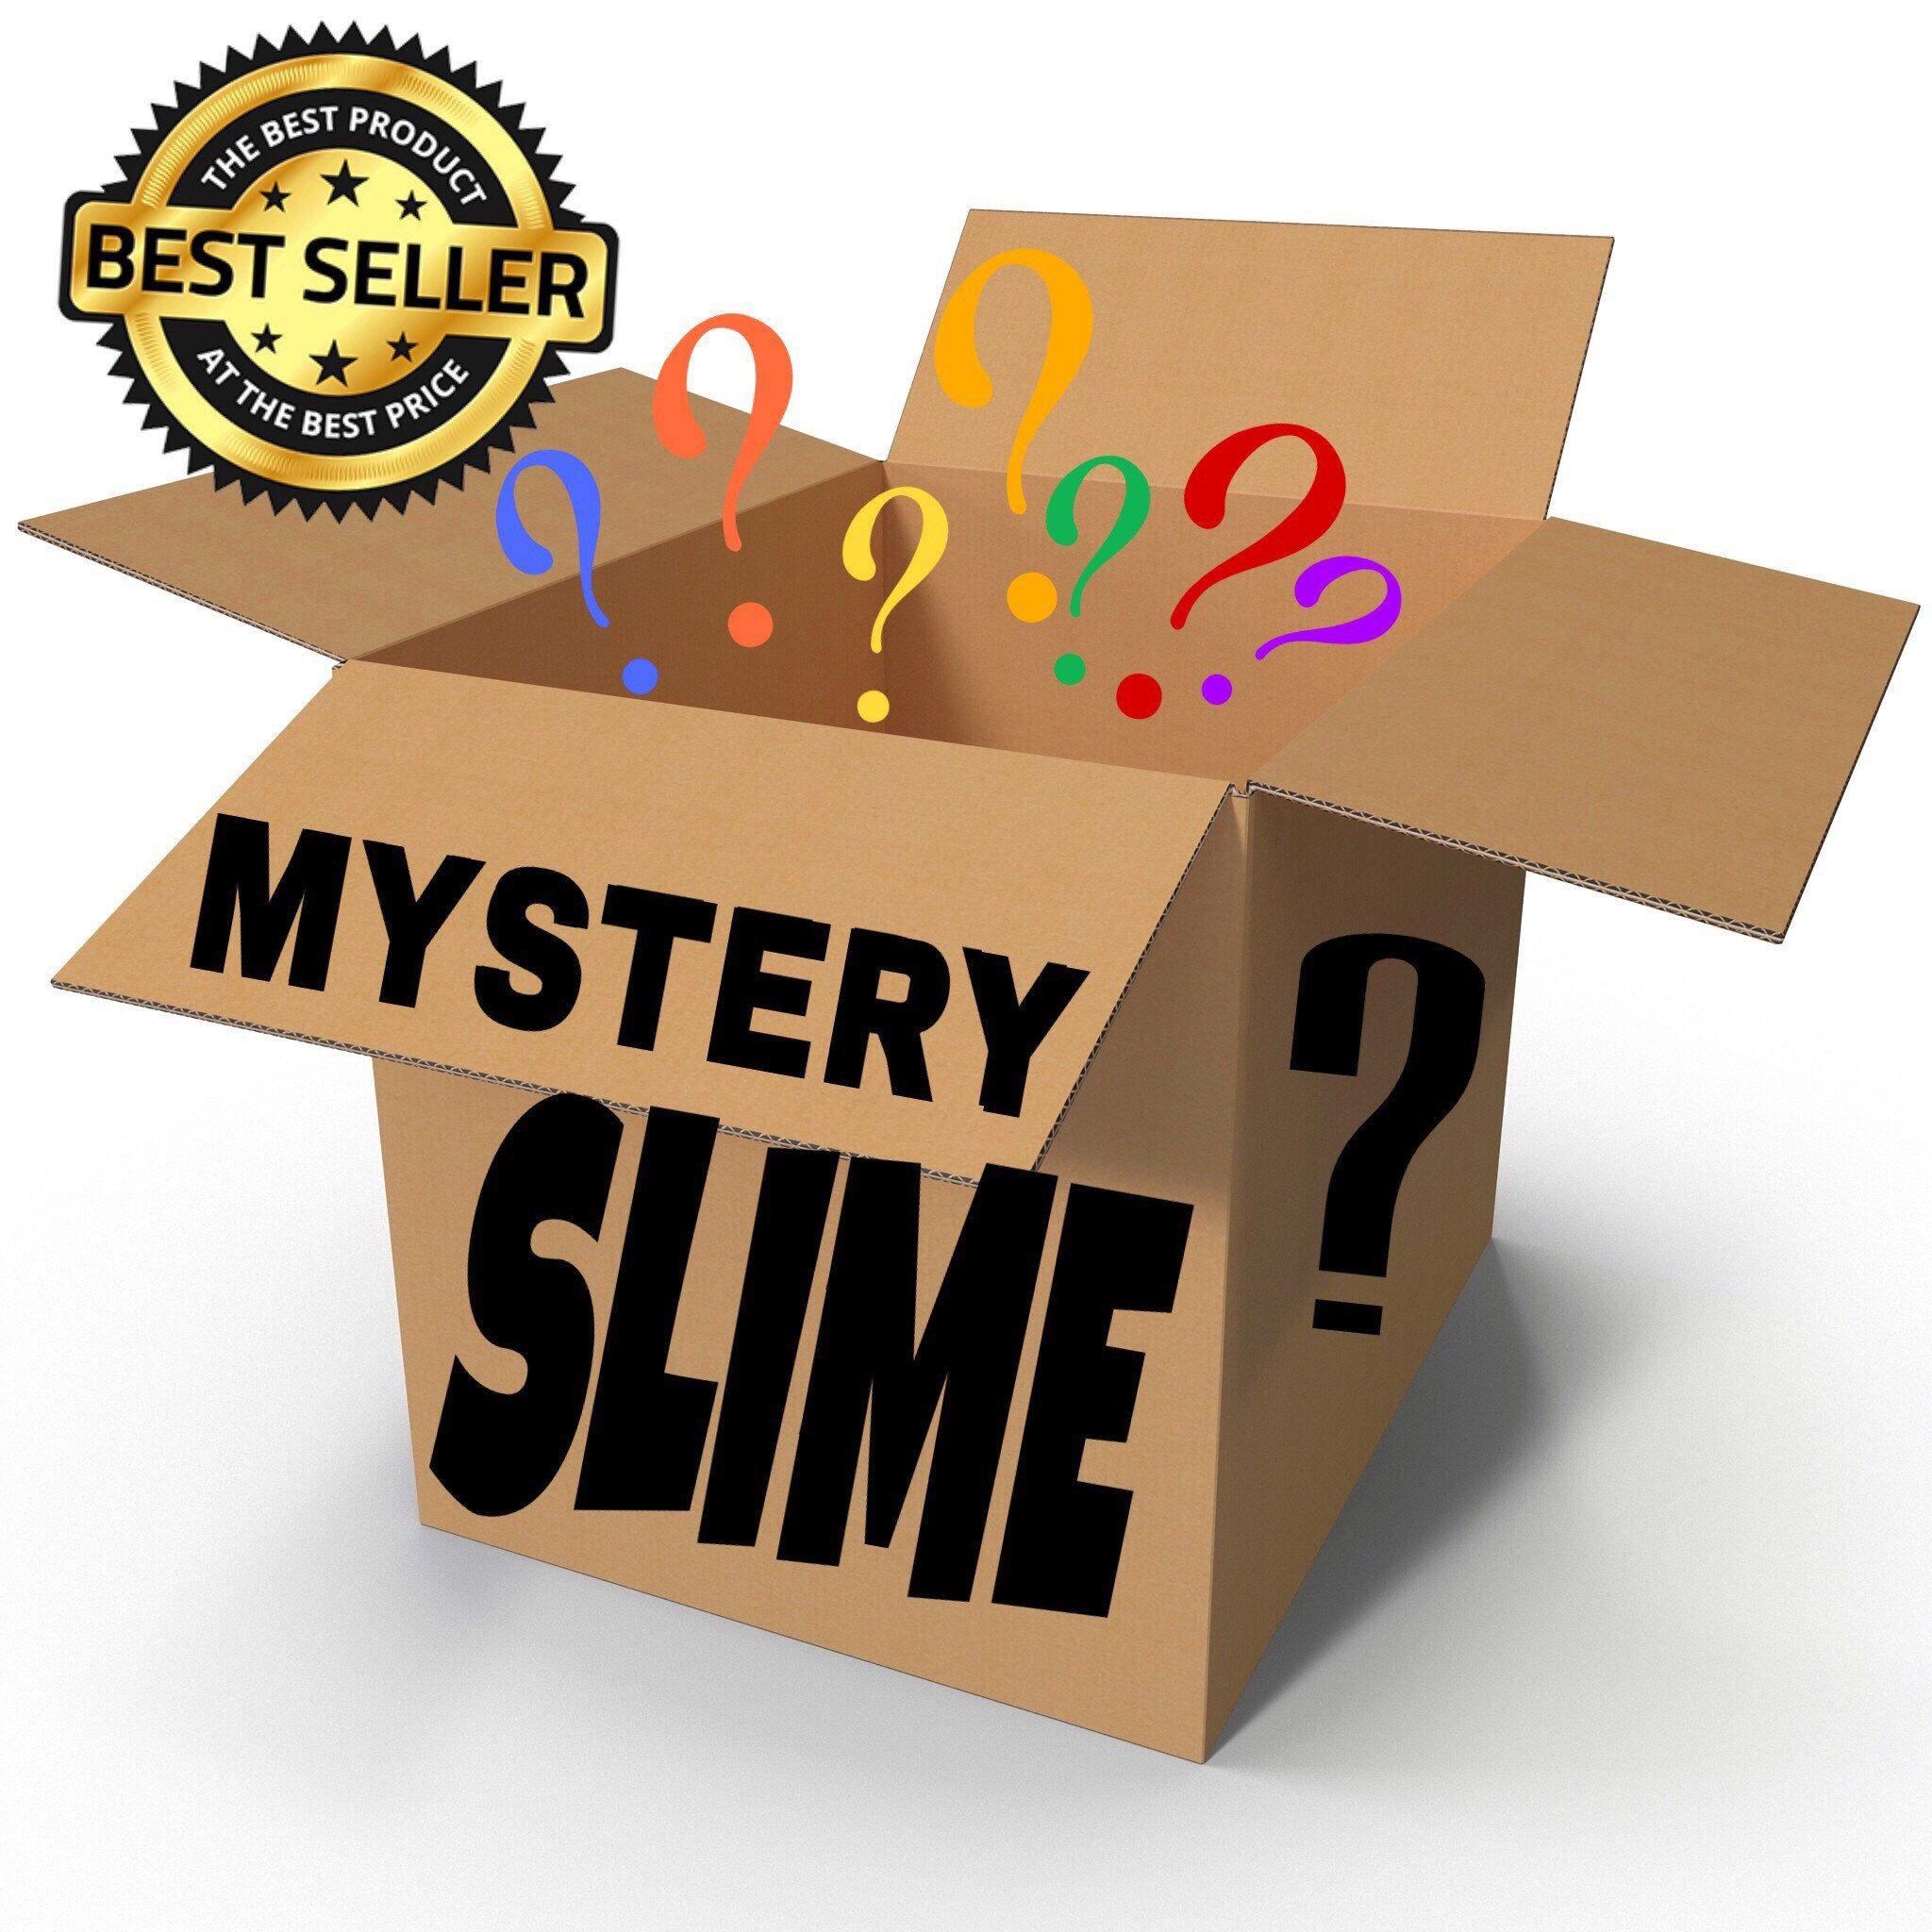 Clear Slime Logo - Slime Mystery Package cheap slime & fast shipping May have